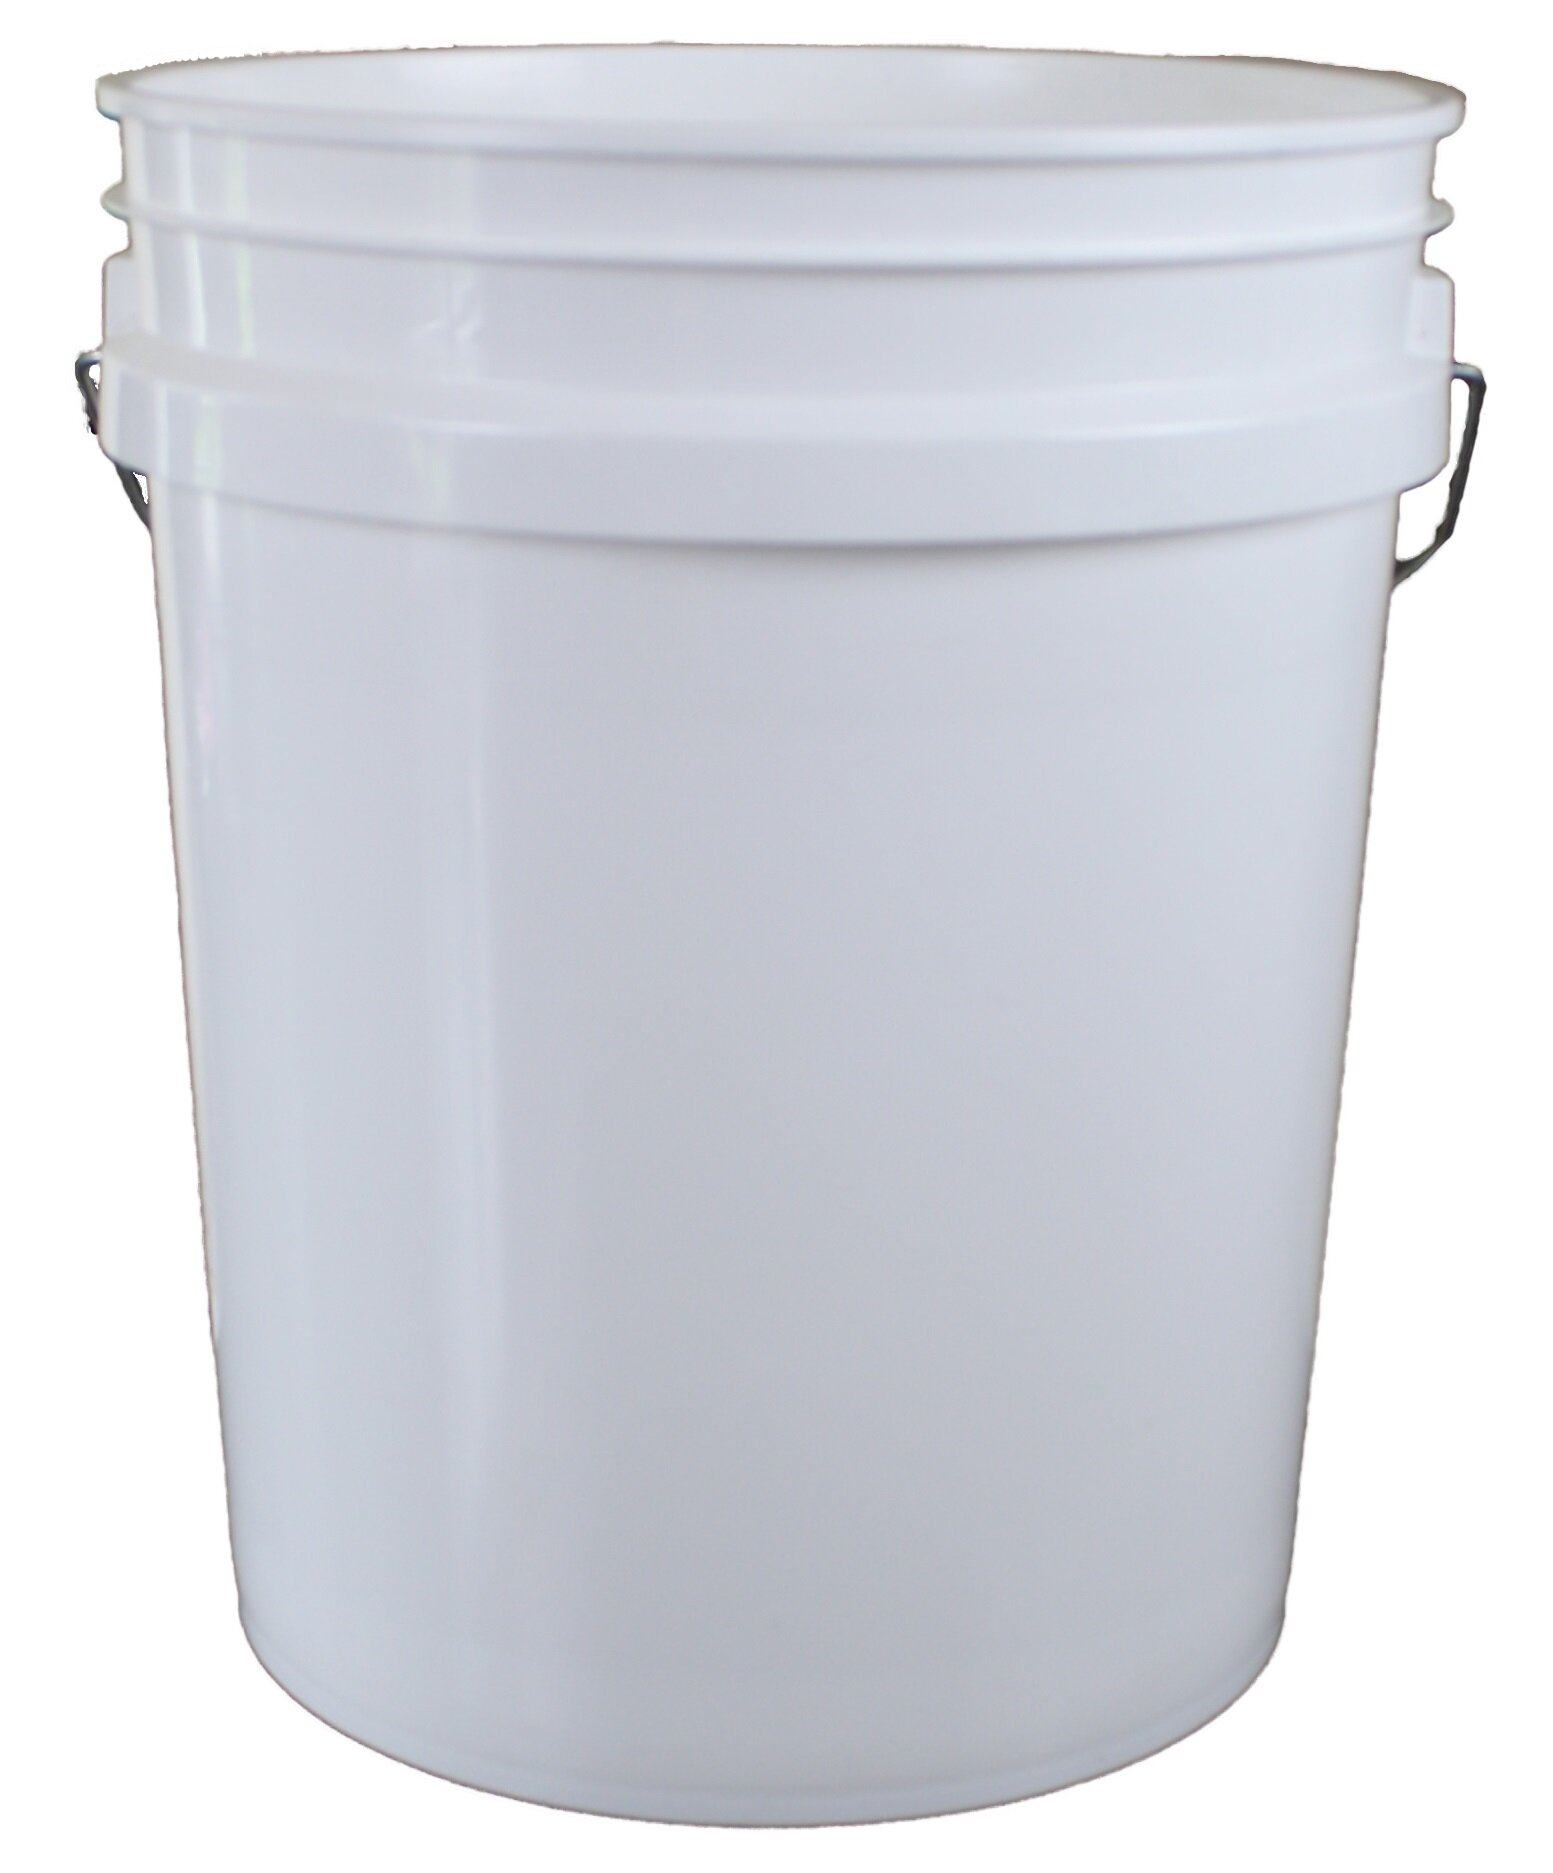 BPA FREE  FOOD GRADE 90 MIL PLASTIC ALL PURPOSE PAIL 5 GALLON BUCKET WITH LID 